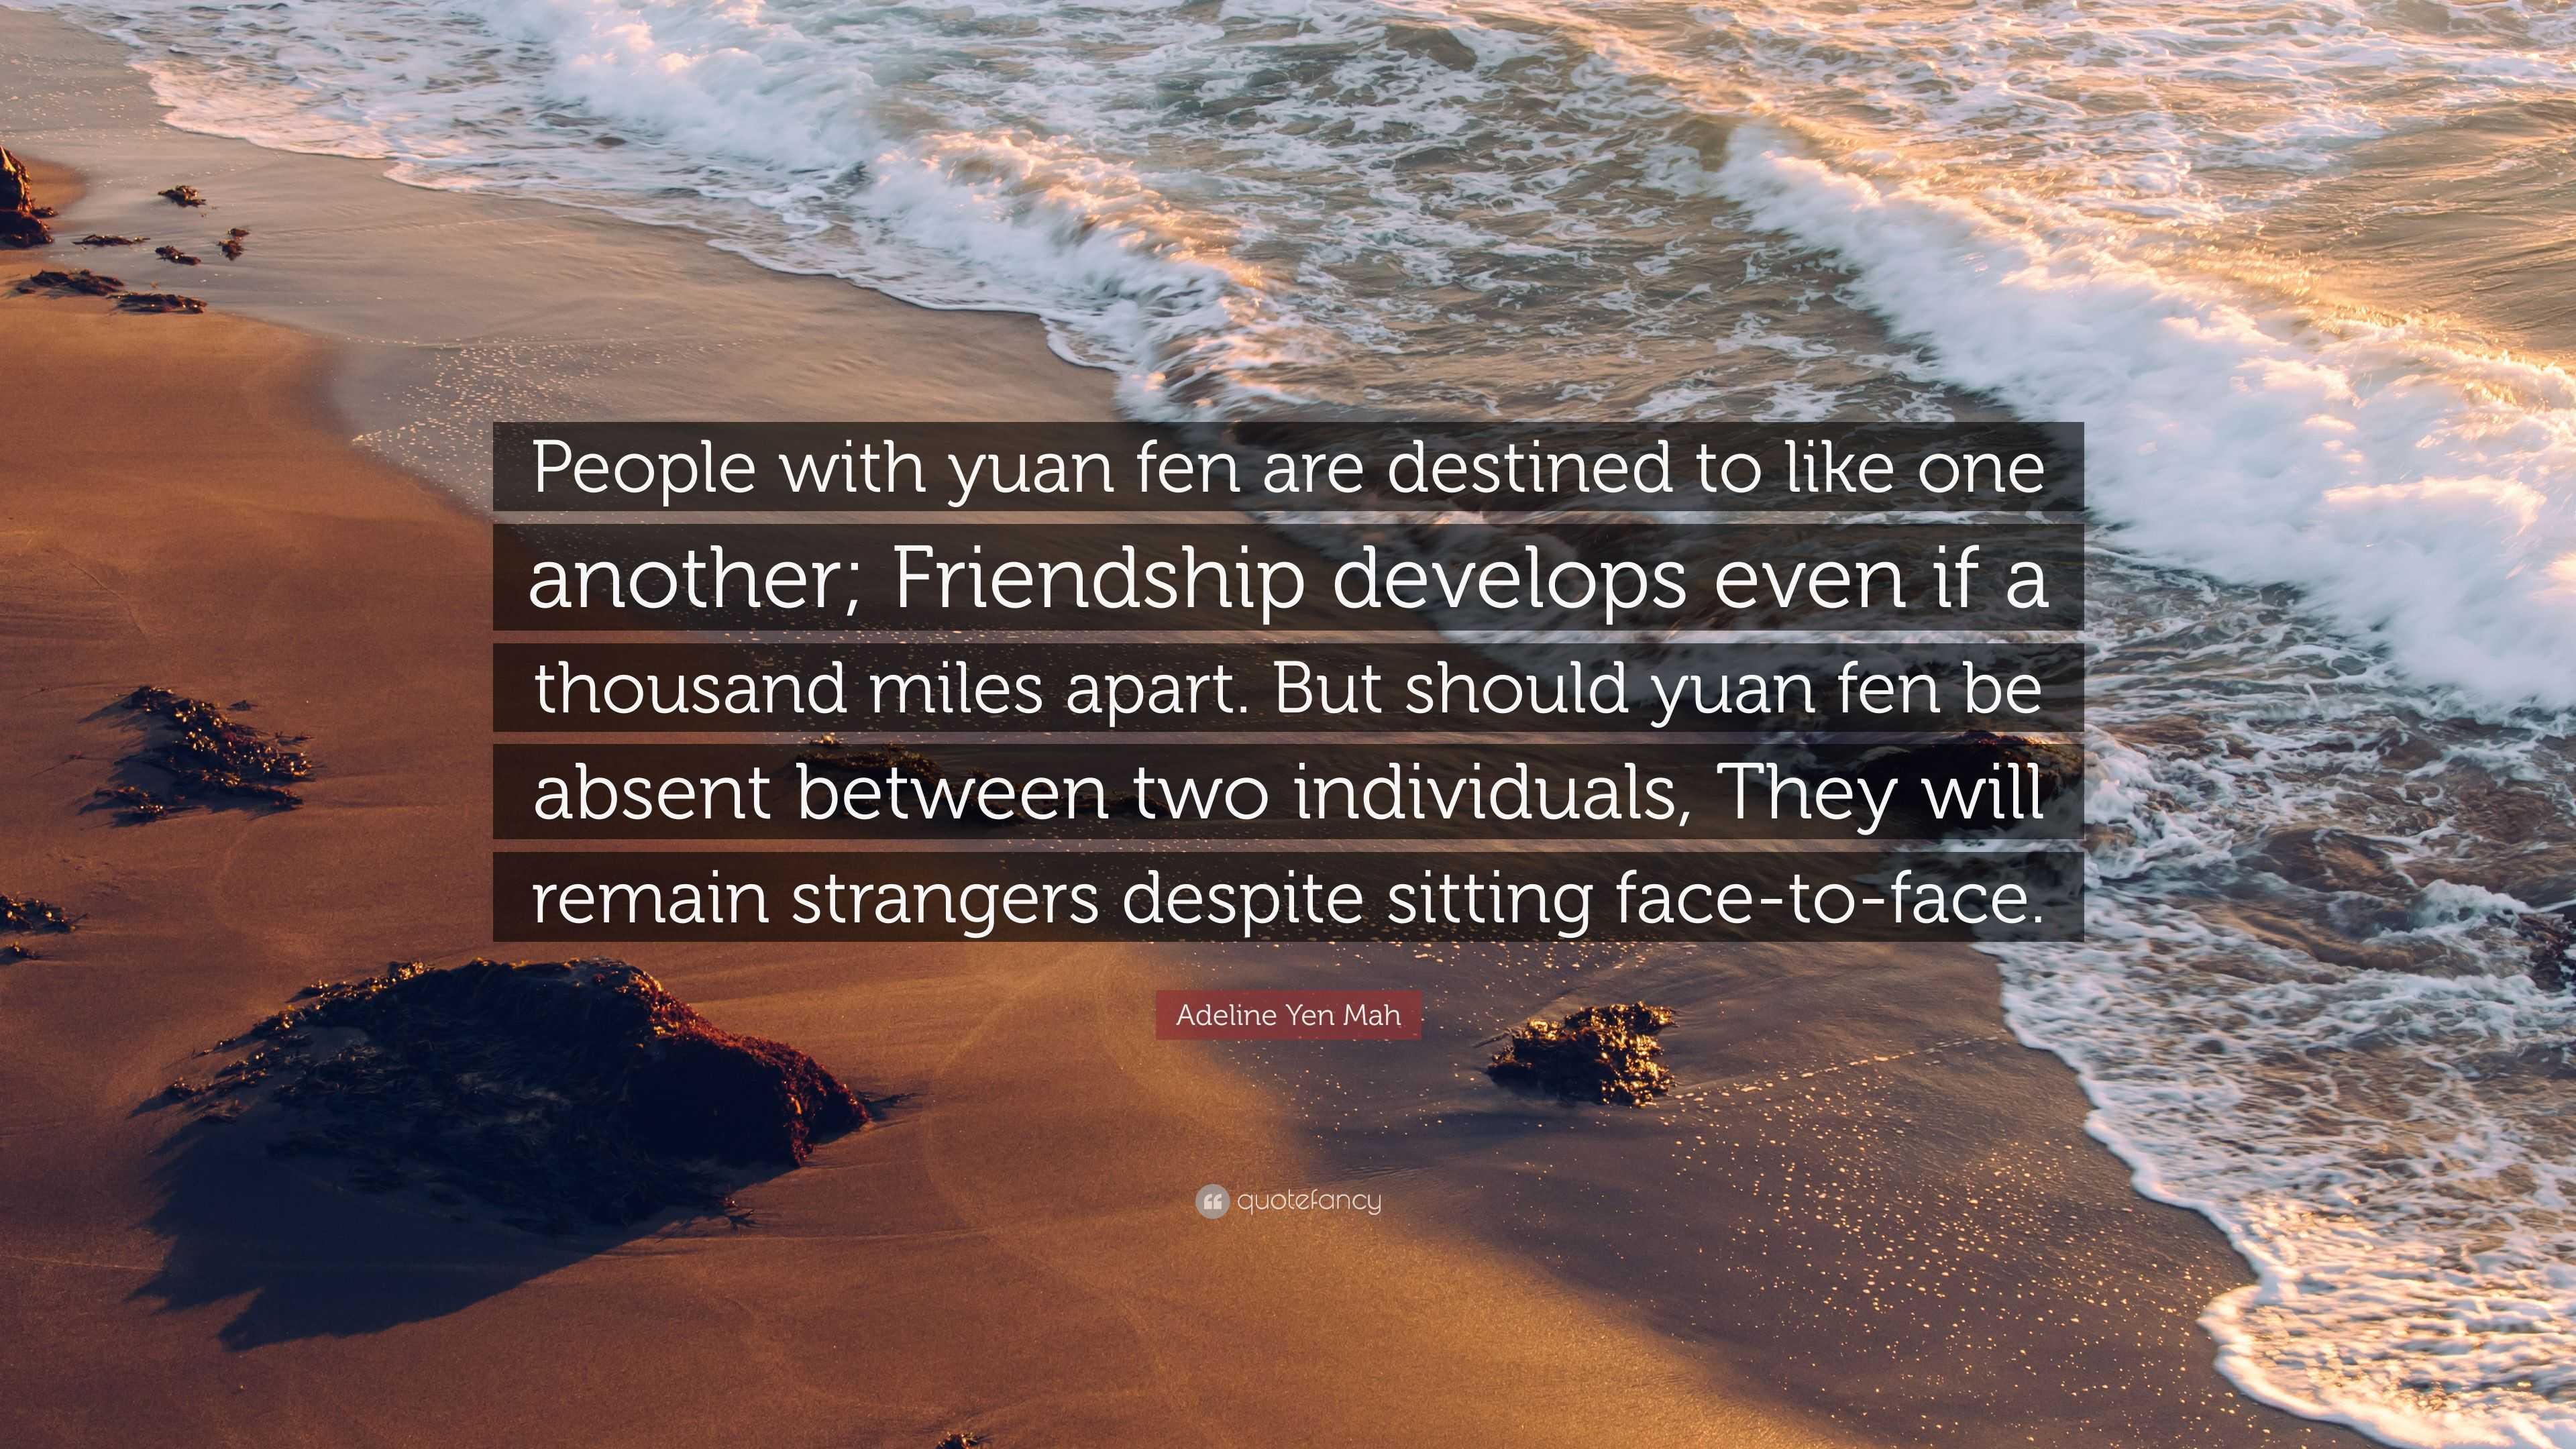 Adeline Yen Mah Quote: “People with yuan fen are destined to like one ...